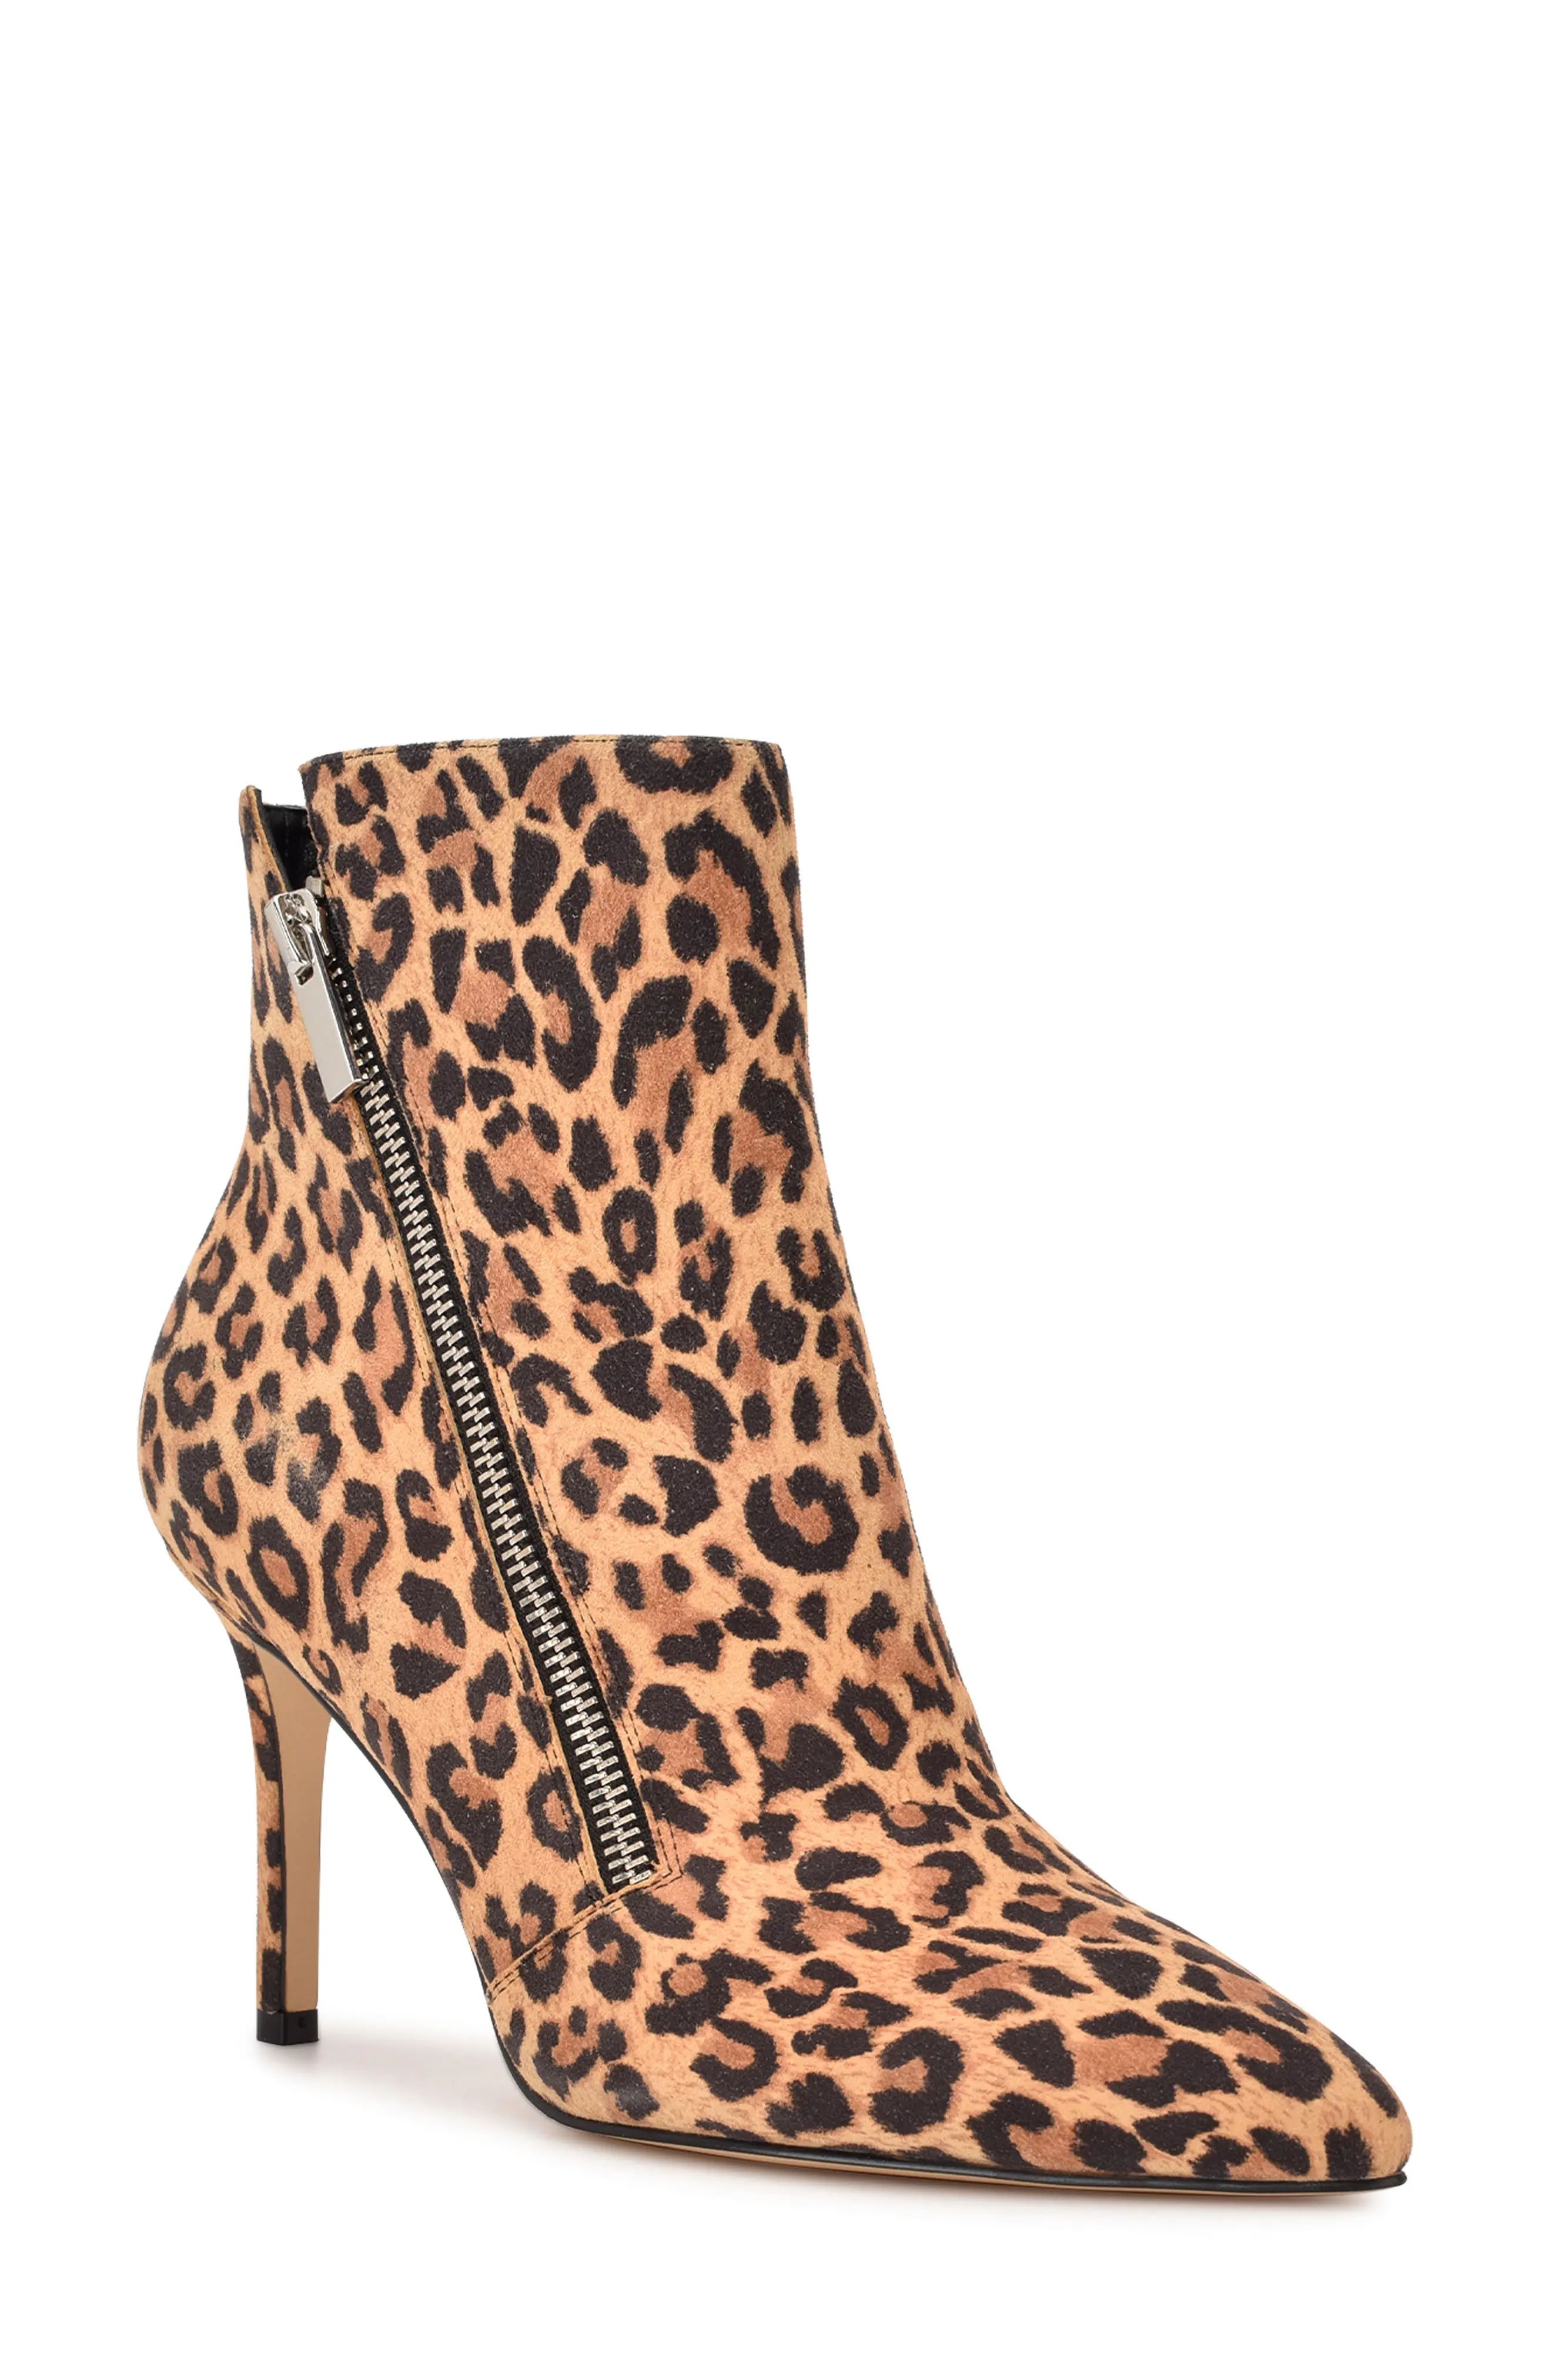 Nine West Fast Pointed Toe Bootie in Leopard Print Suede at Nordstrom, Size 7 | Nordstrom